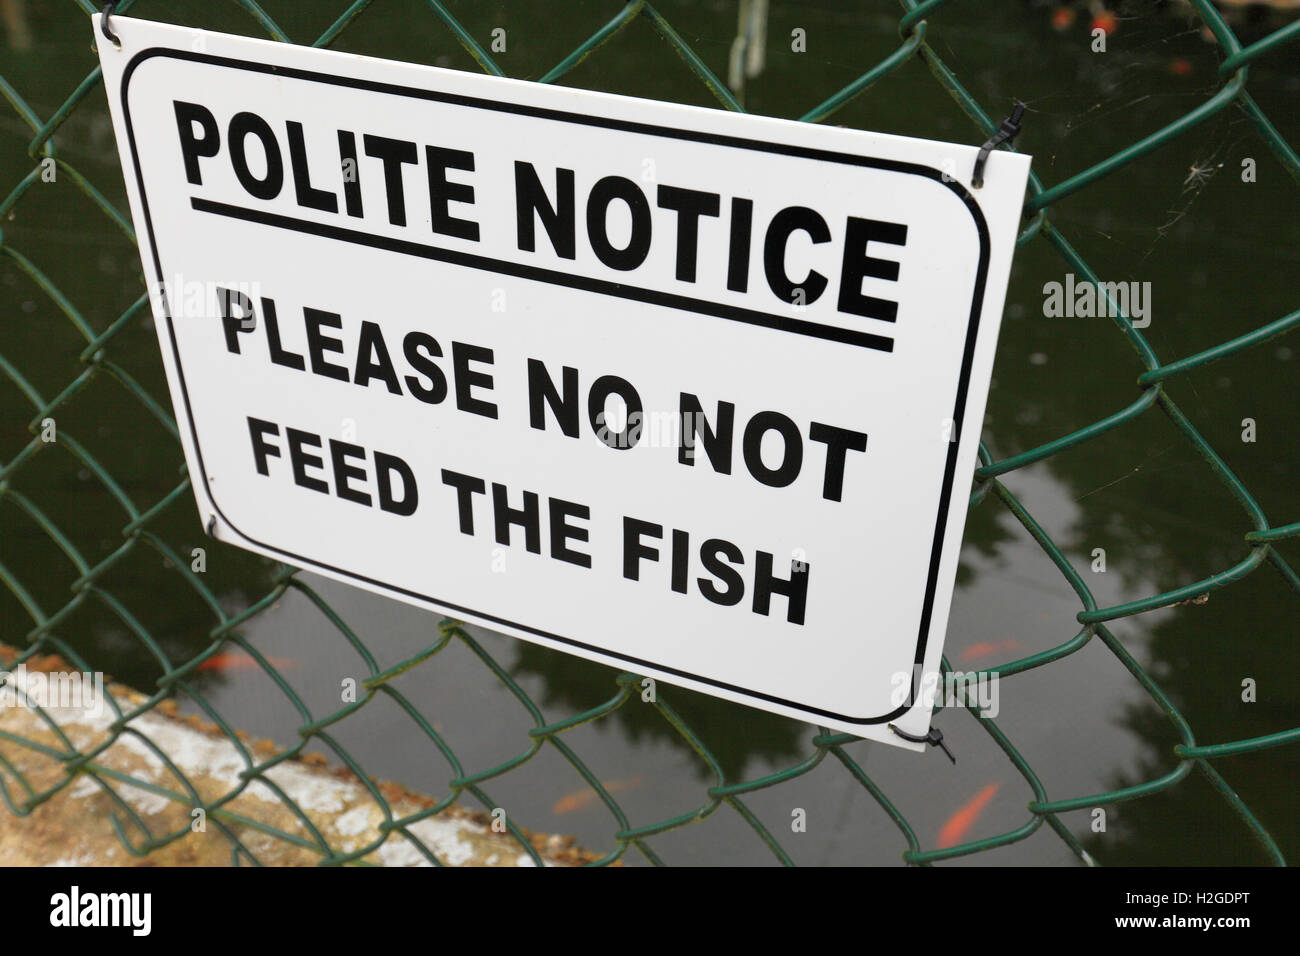 Sign at fish pond 'polite notice - please do not feed the fish.' Stock Photo